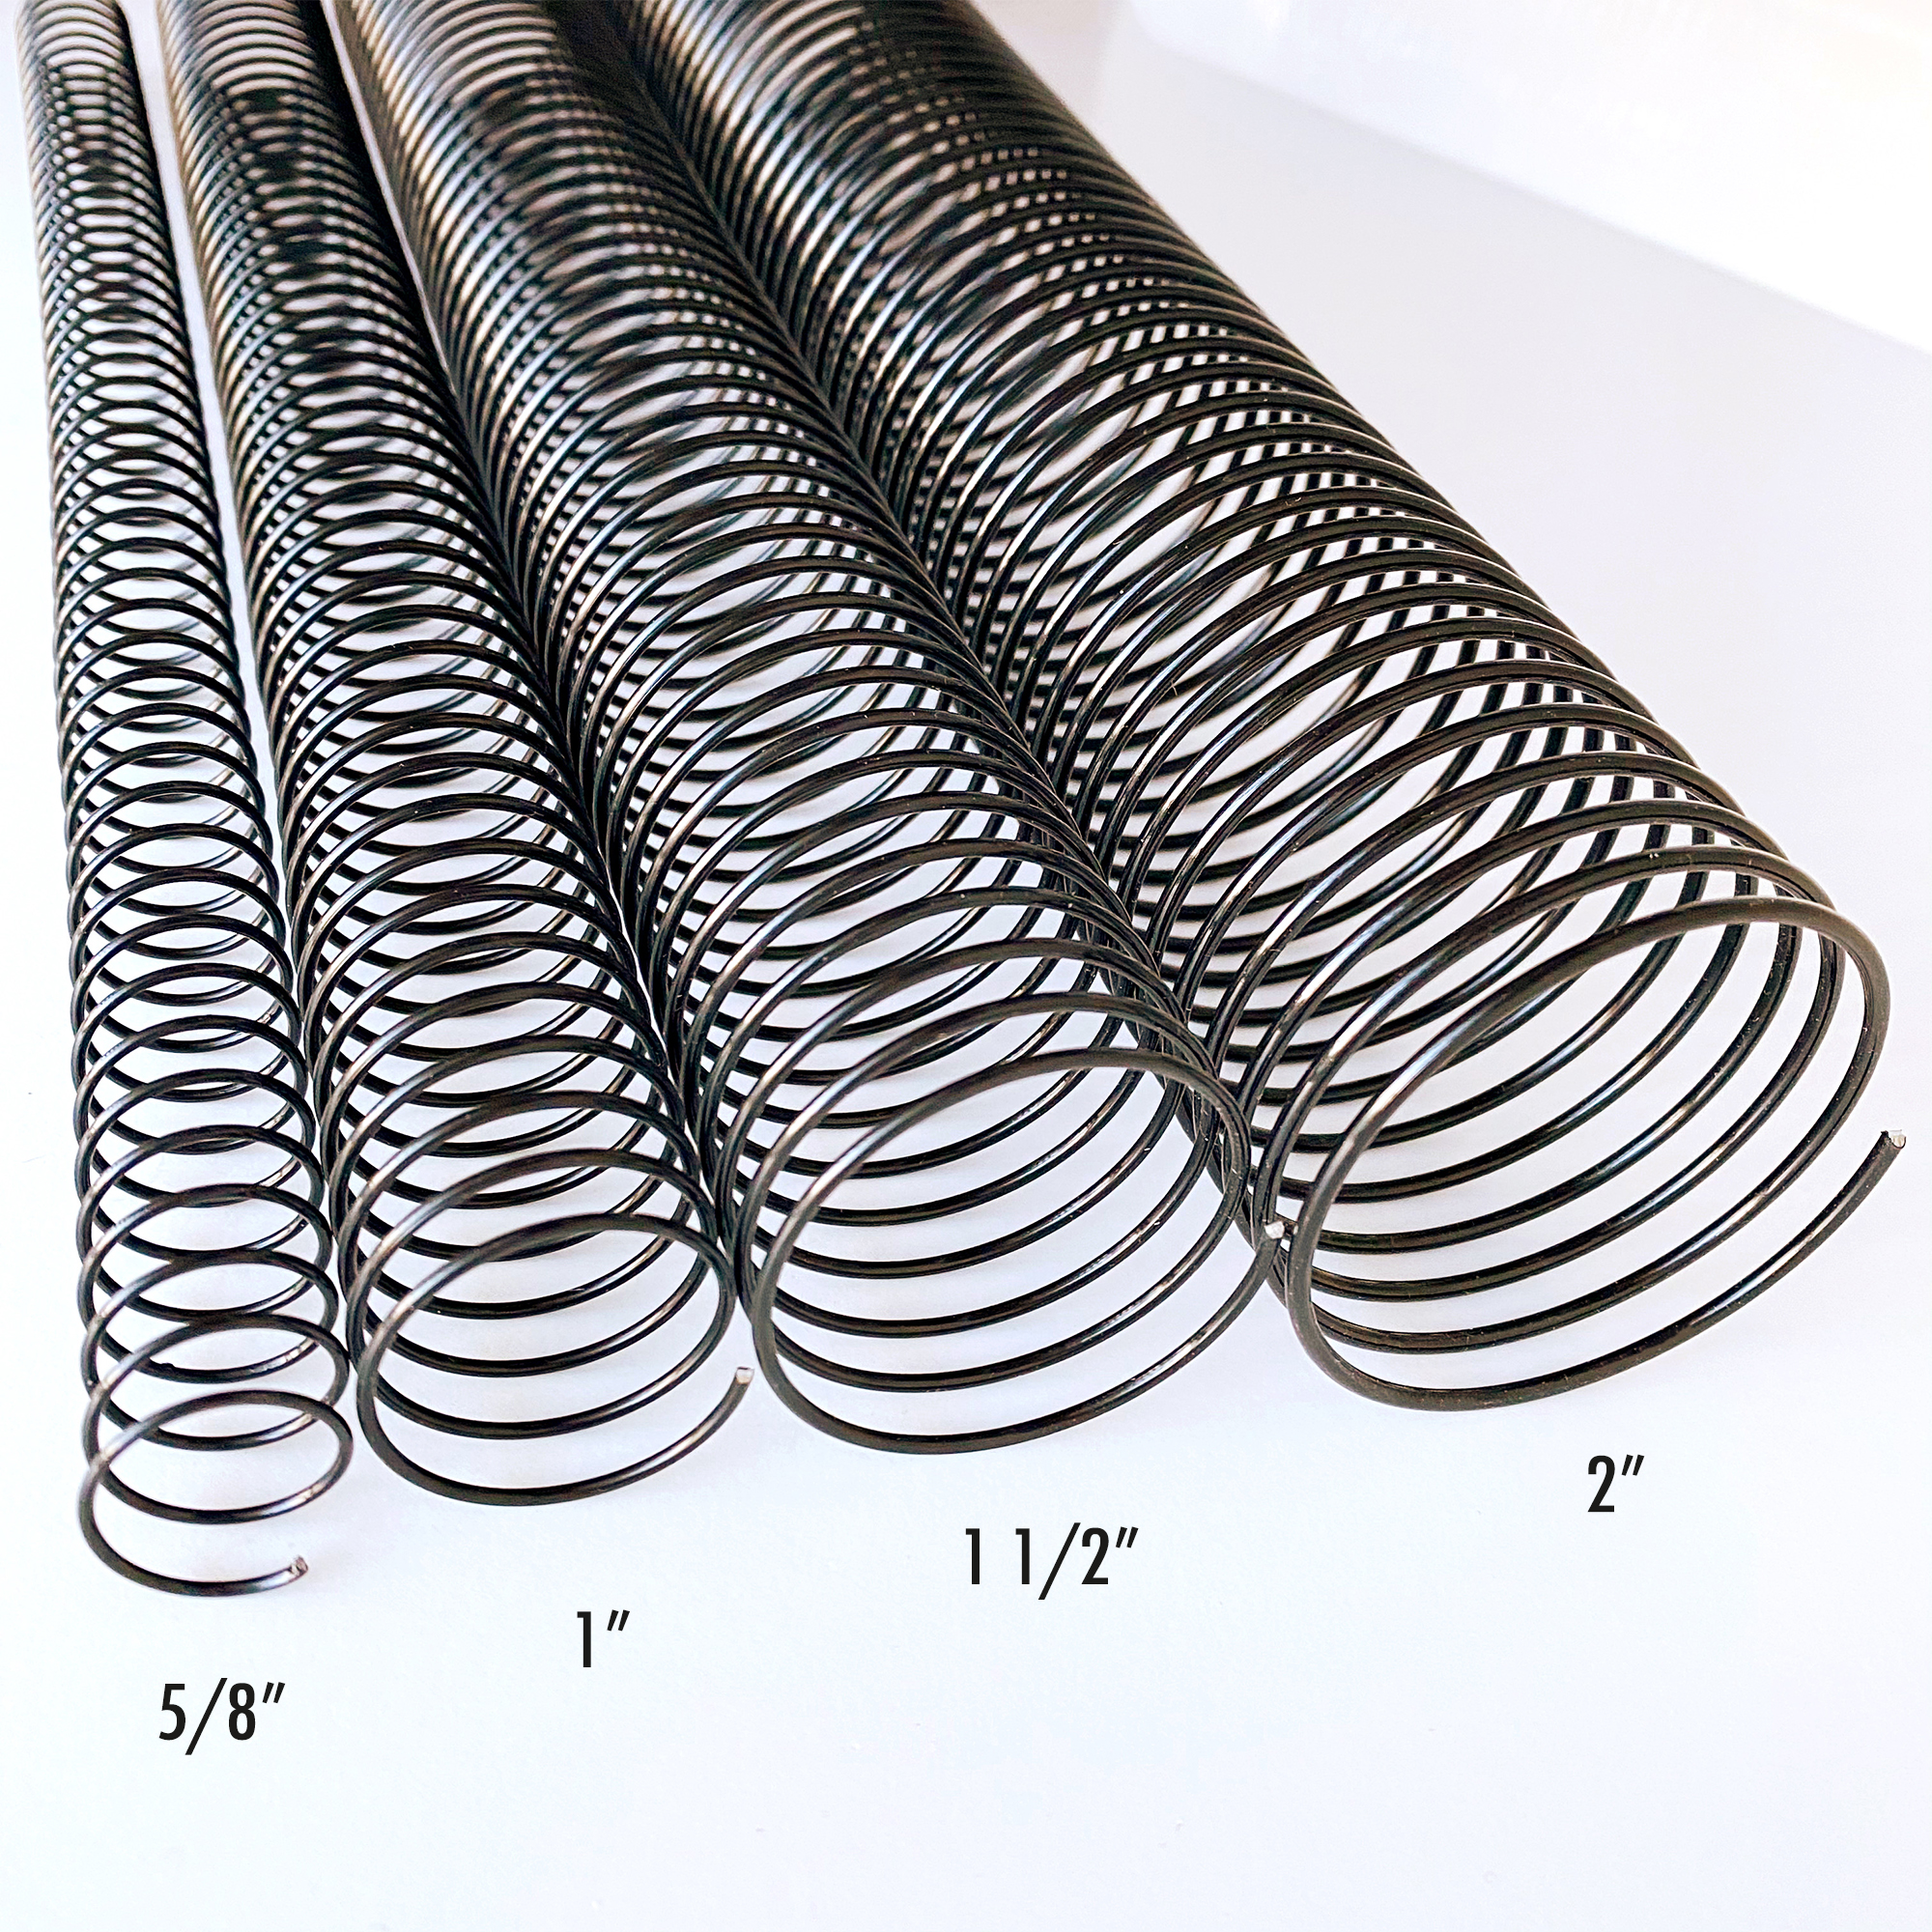 Coil sizes